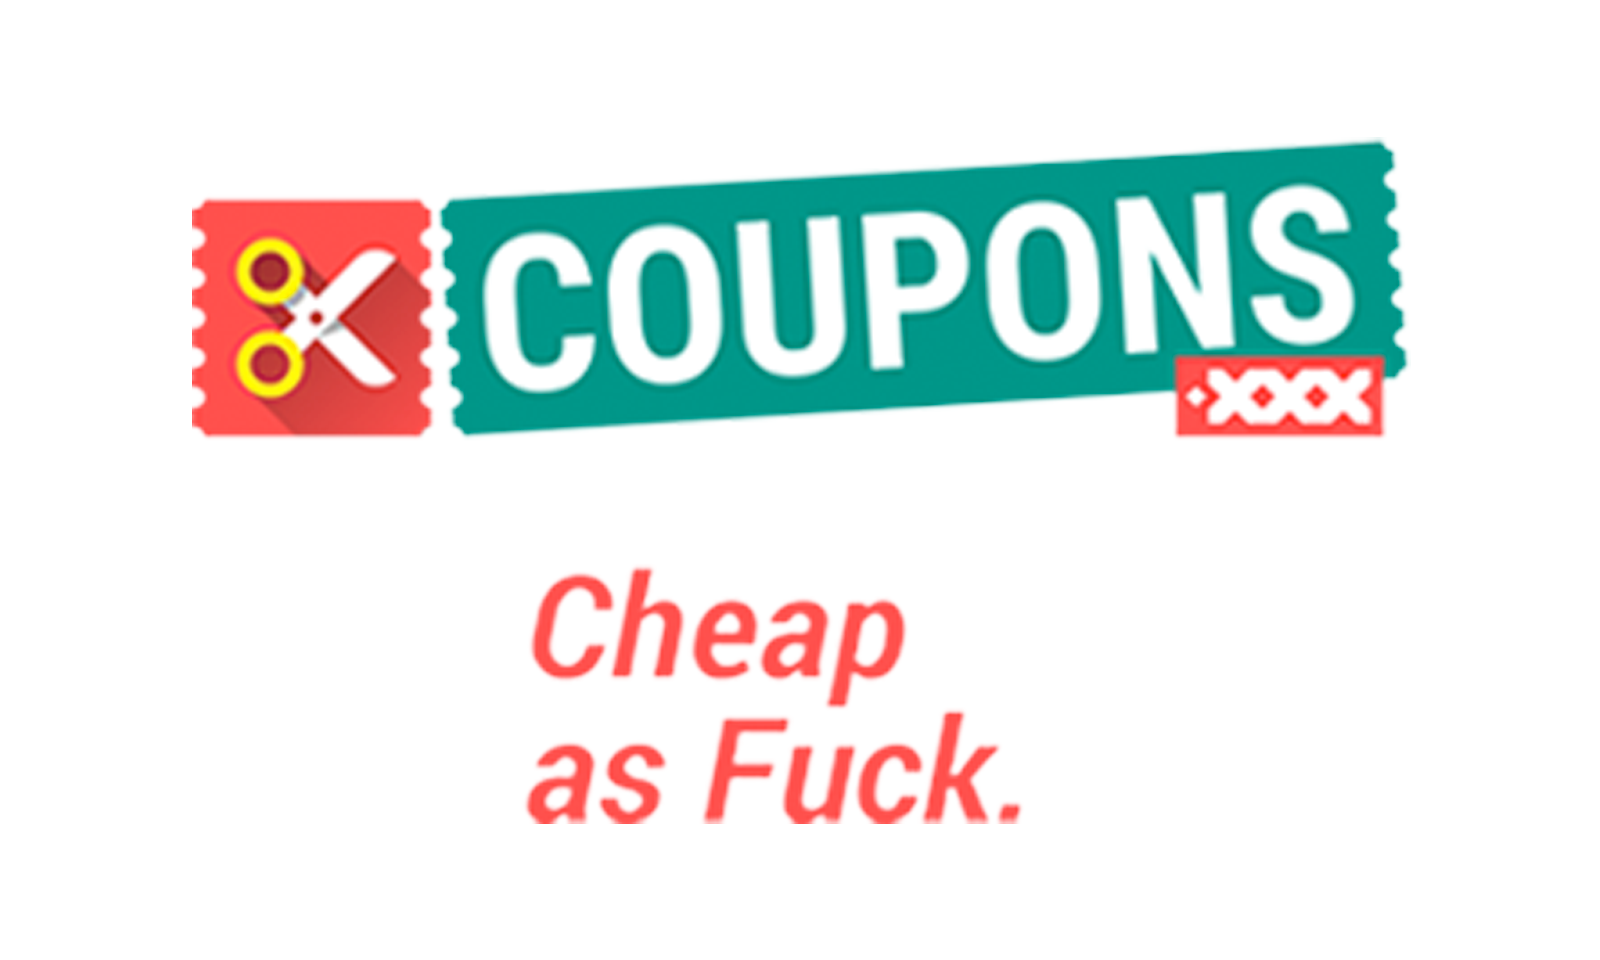 All-In-One Affiliate Program Launches from Coupons.xxx